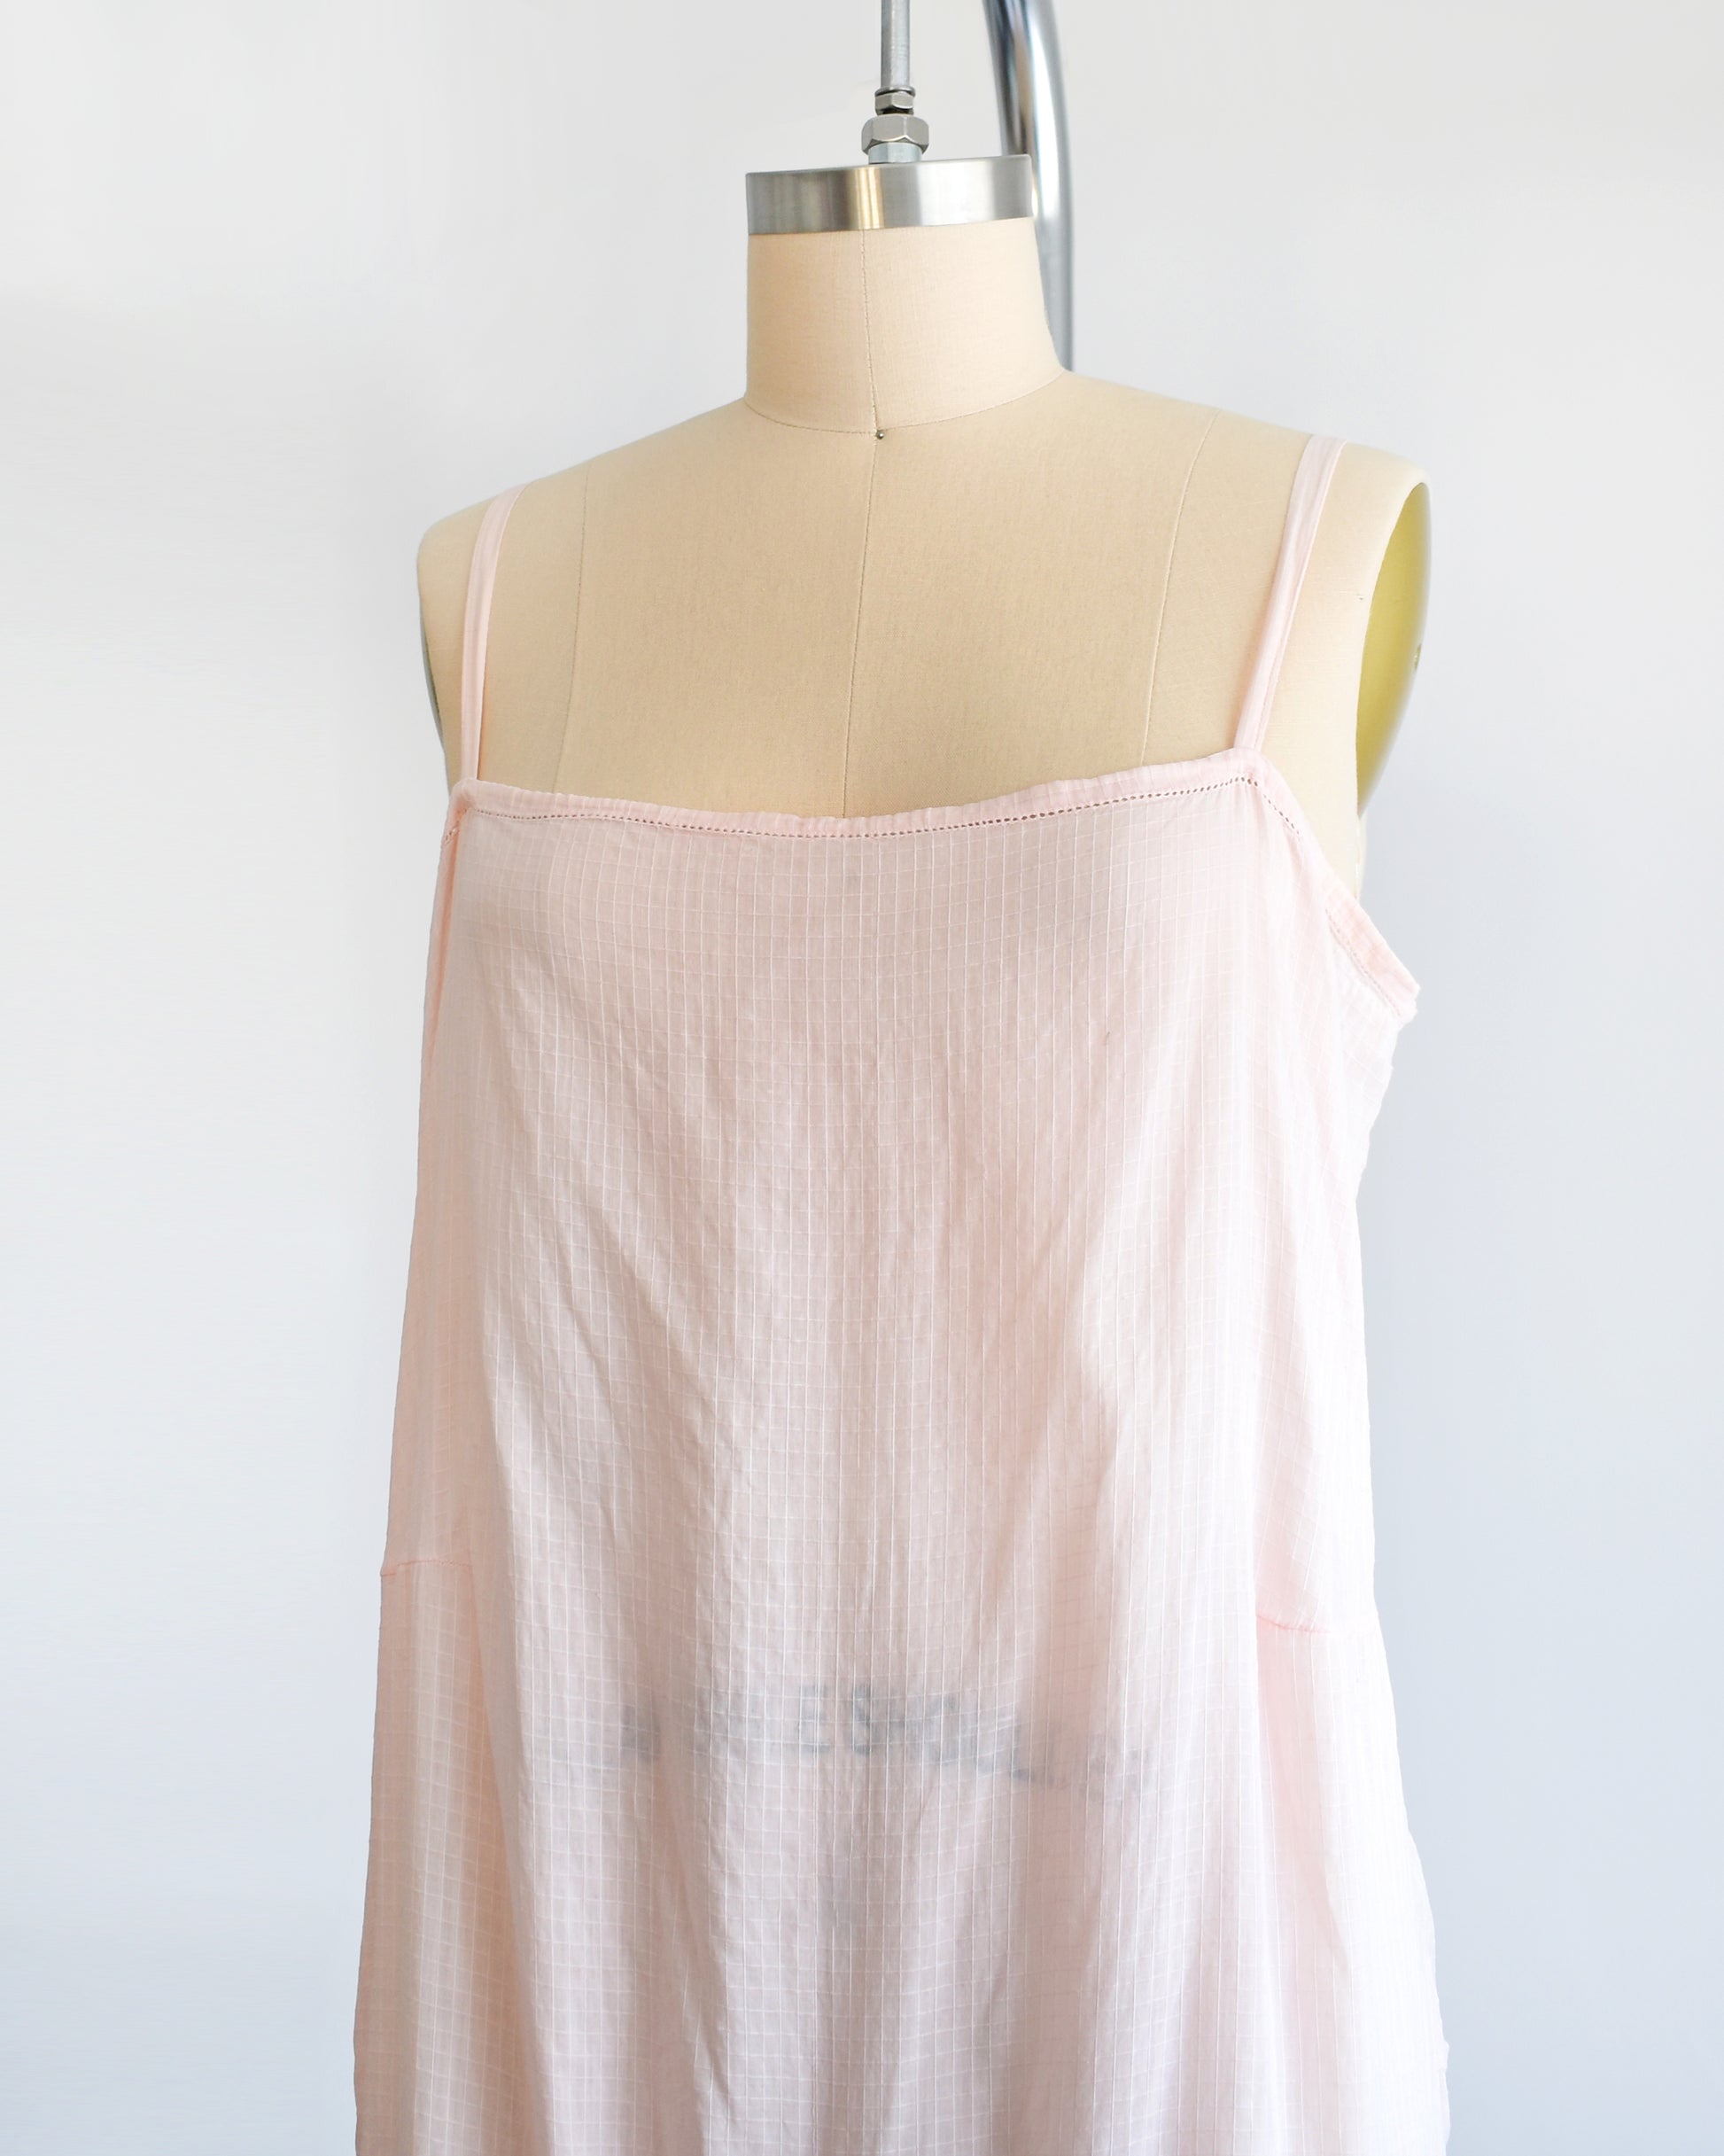 Side front view of a vintage 1920s light pink chemise step in, which has spaghetti straps and square neckline. The garment is on a dress form.